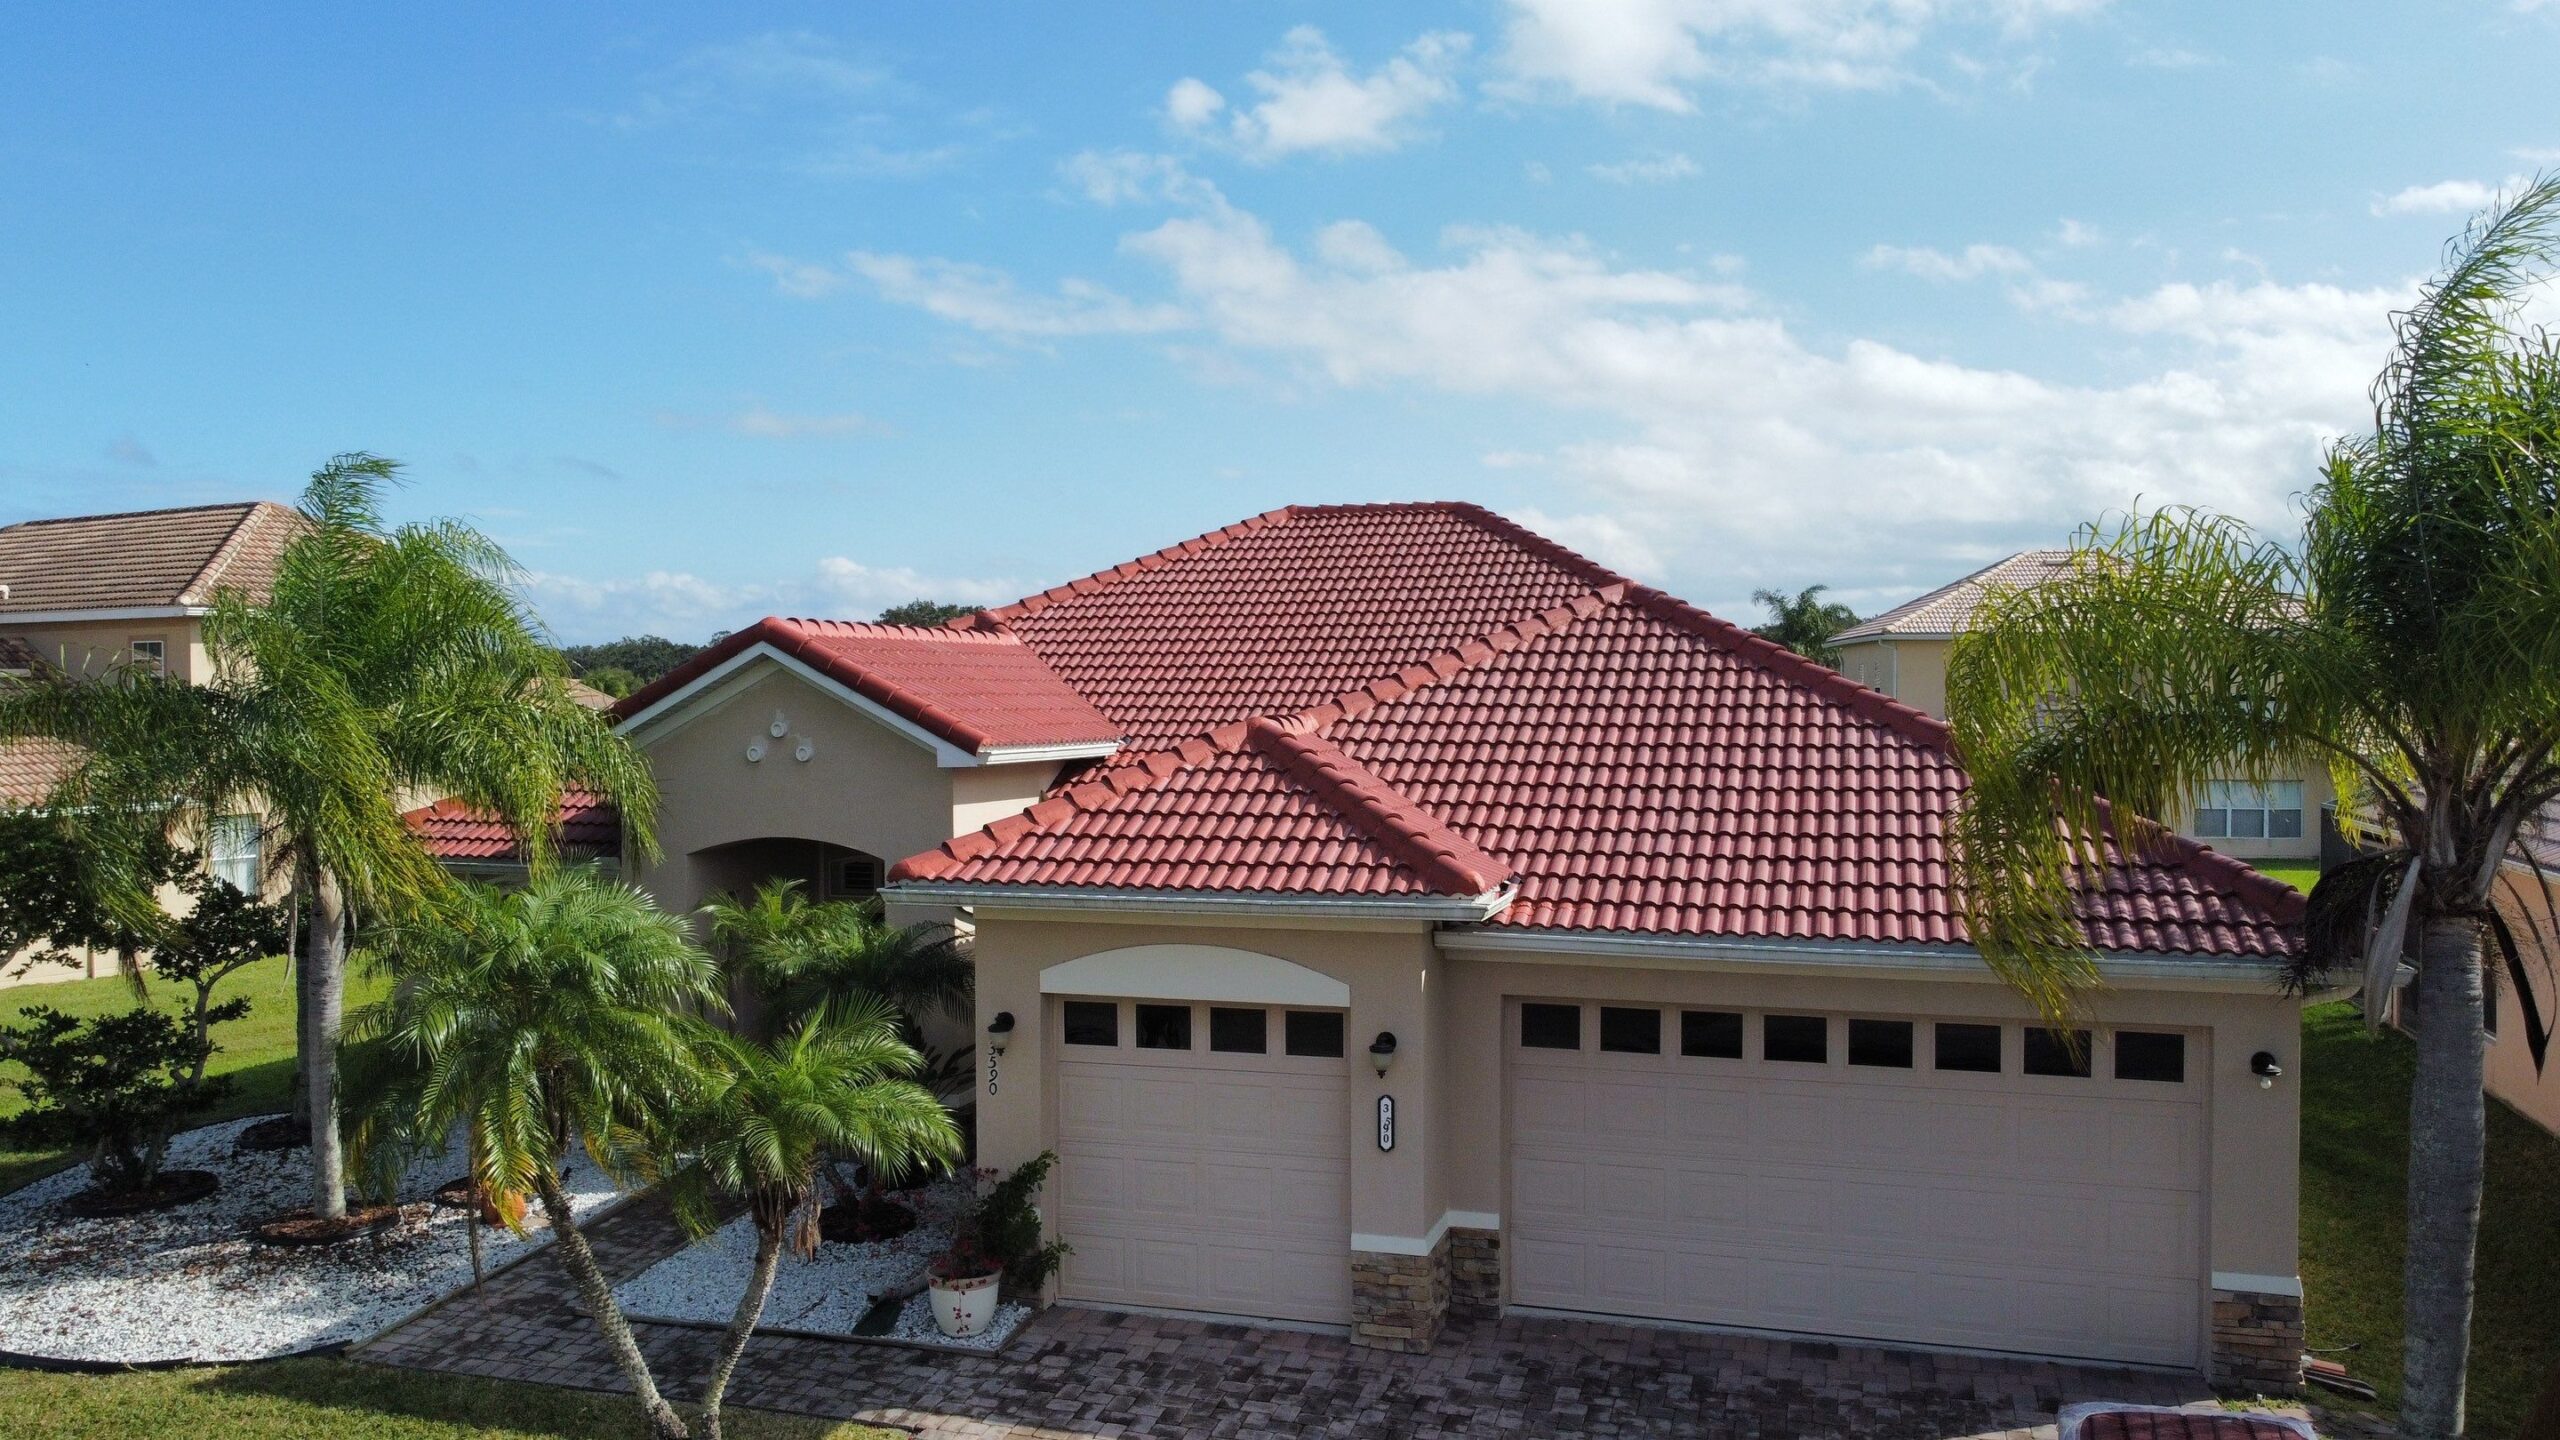 Florida home with a new tile roof.